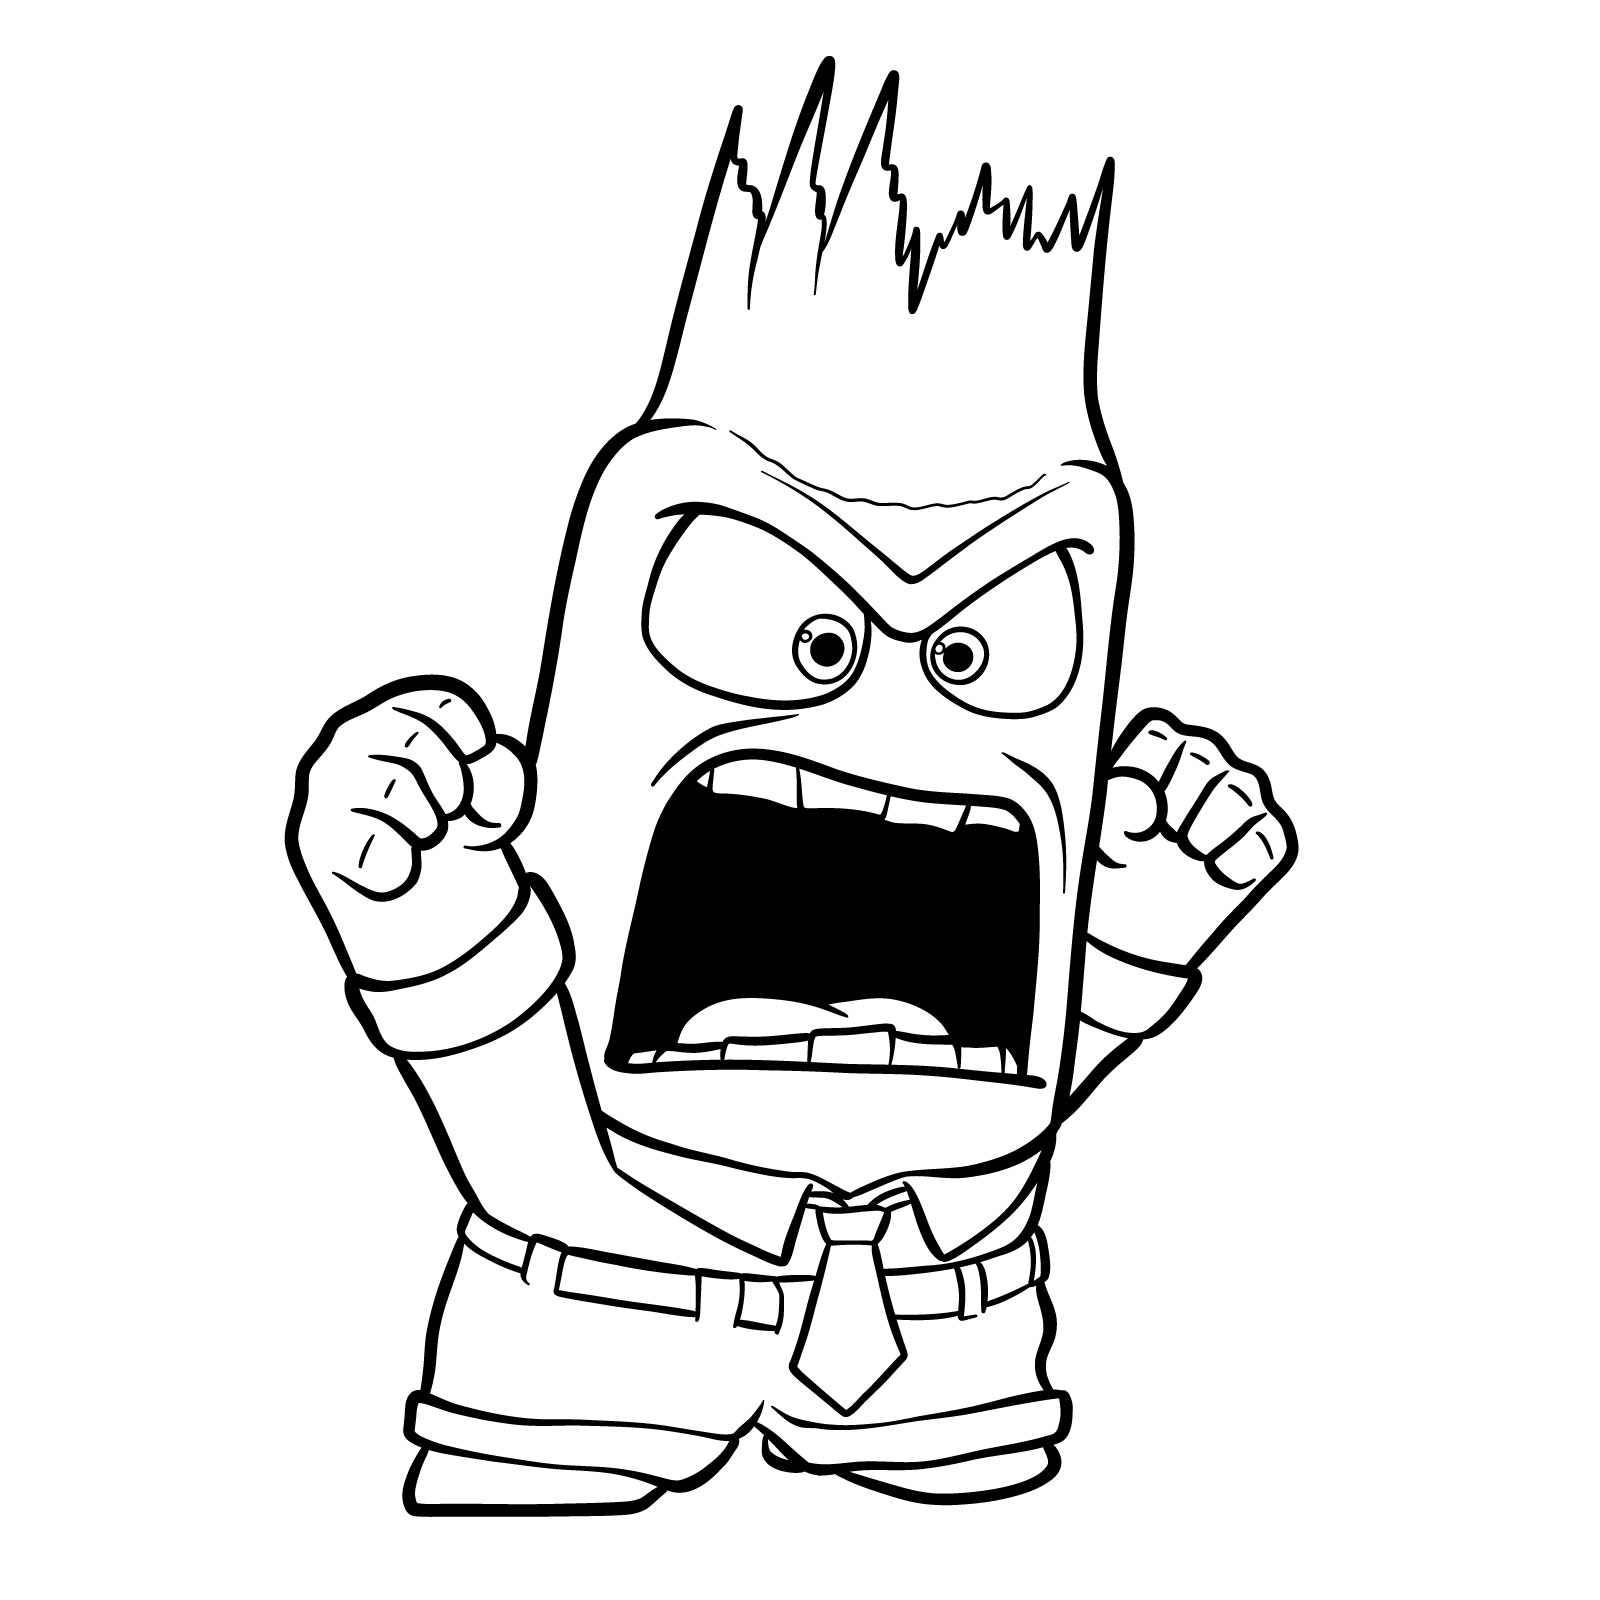 How to draw angry Anger with his head in flames - step 14